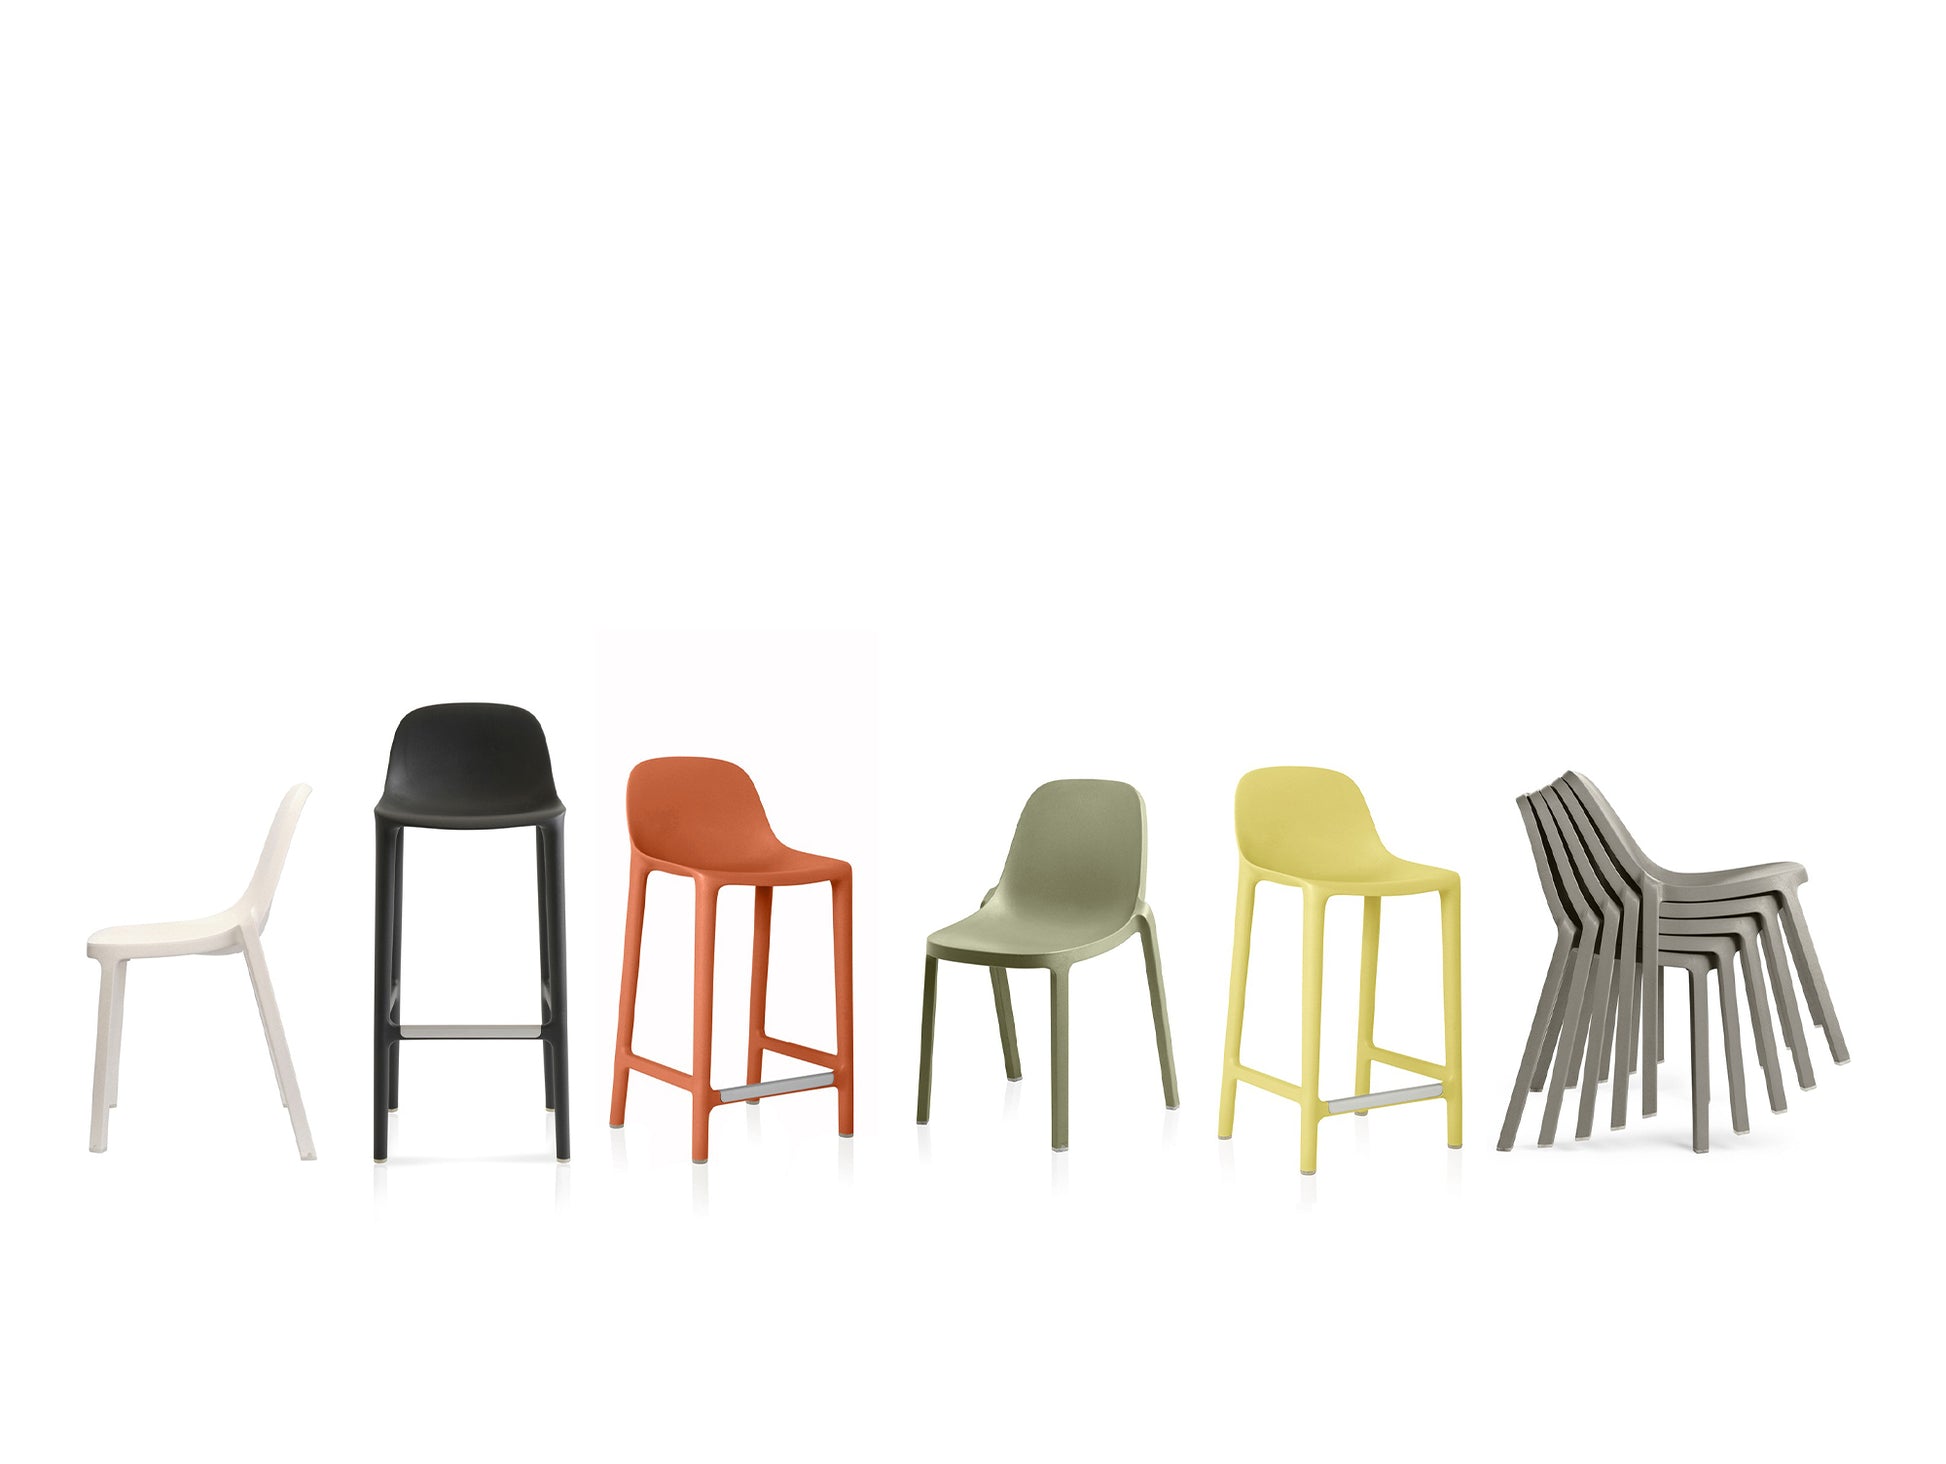 Broom Stacking Chair by Emeco